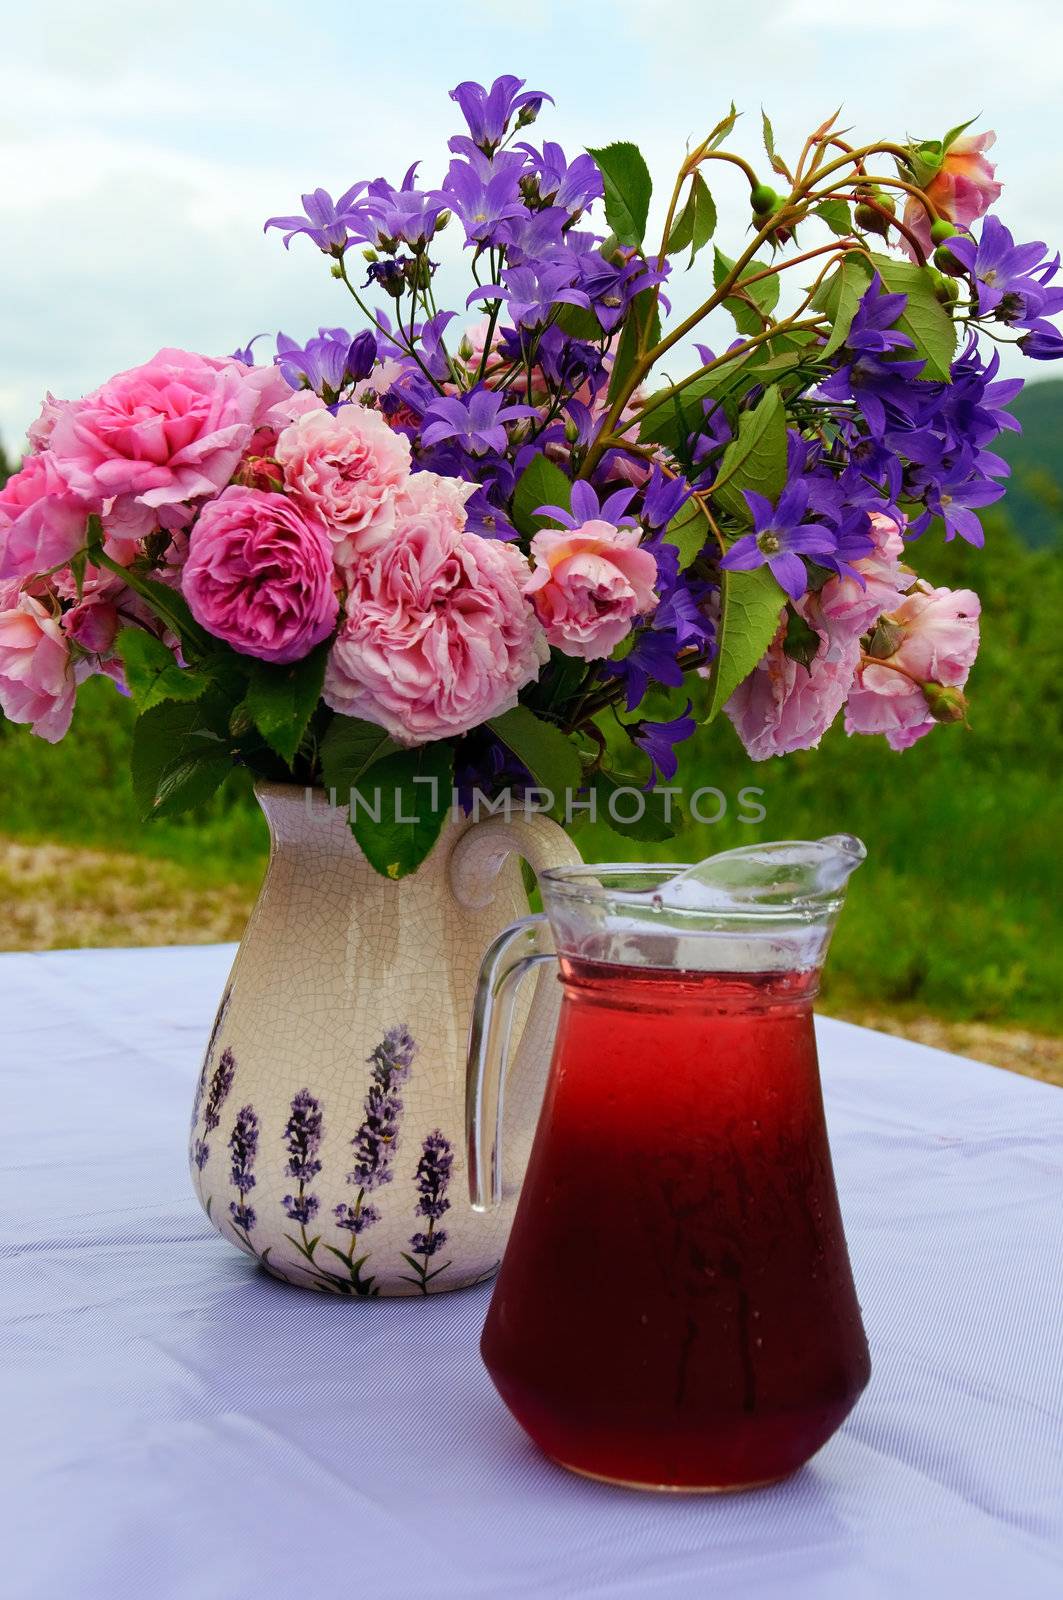 A flower bouquet and a mug with red juice out in the garden